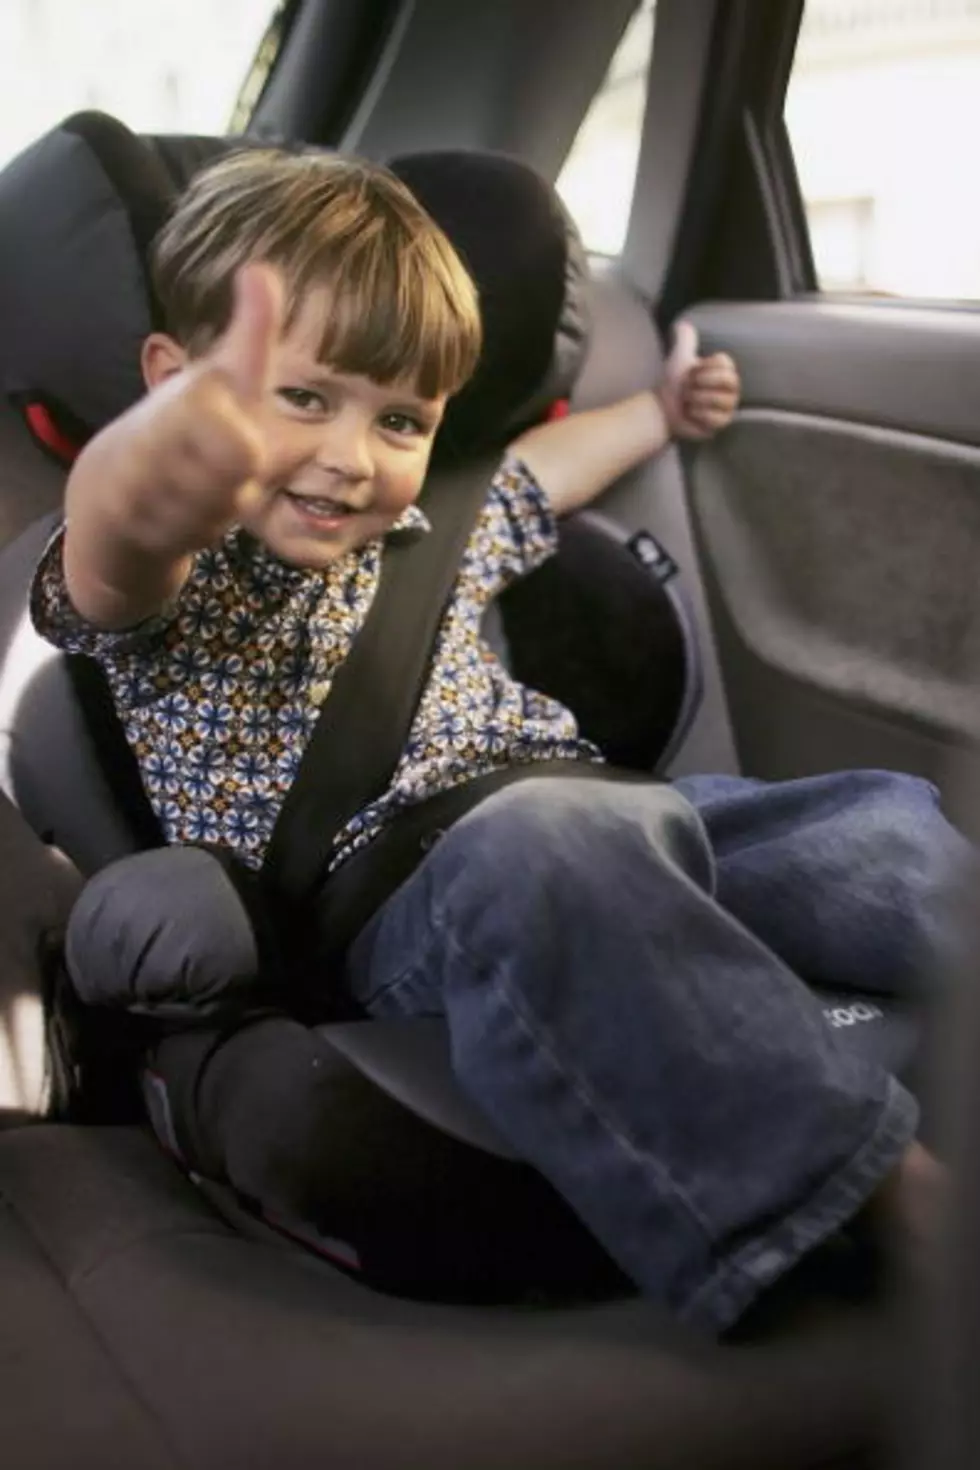 Why You Shouldn’t Put Children In A Car Seat With Winter Coats [WATCH]